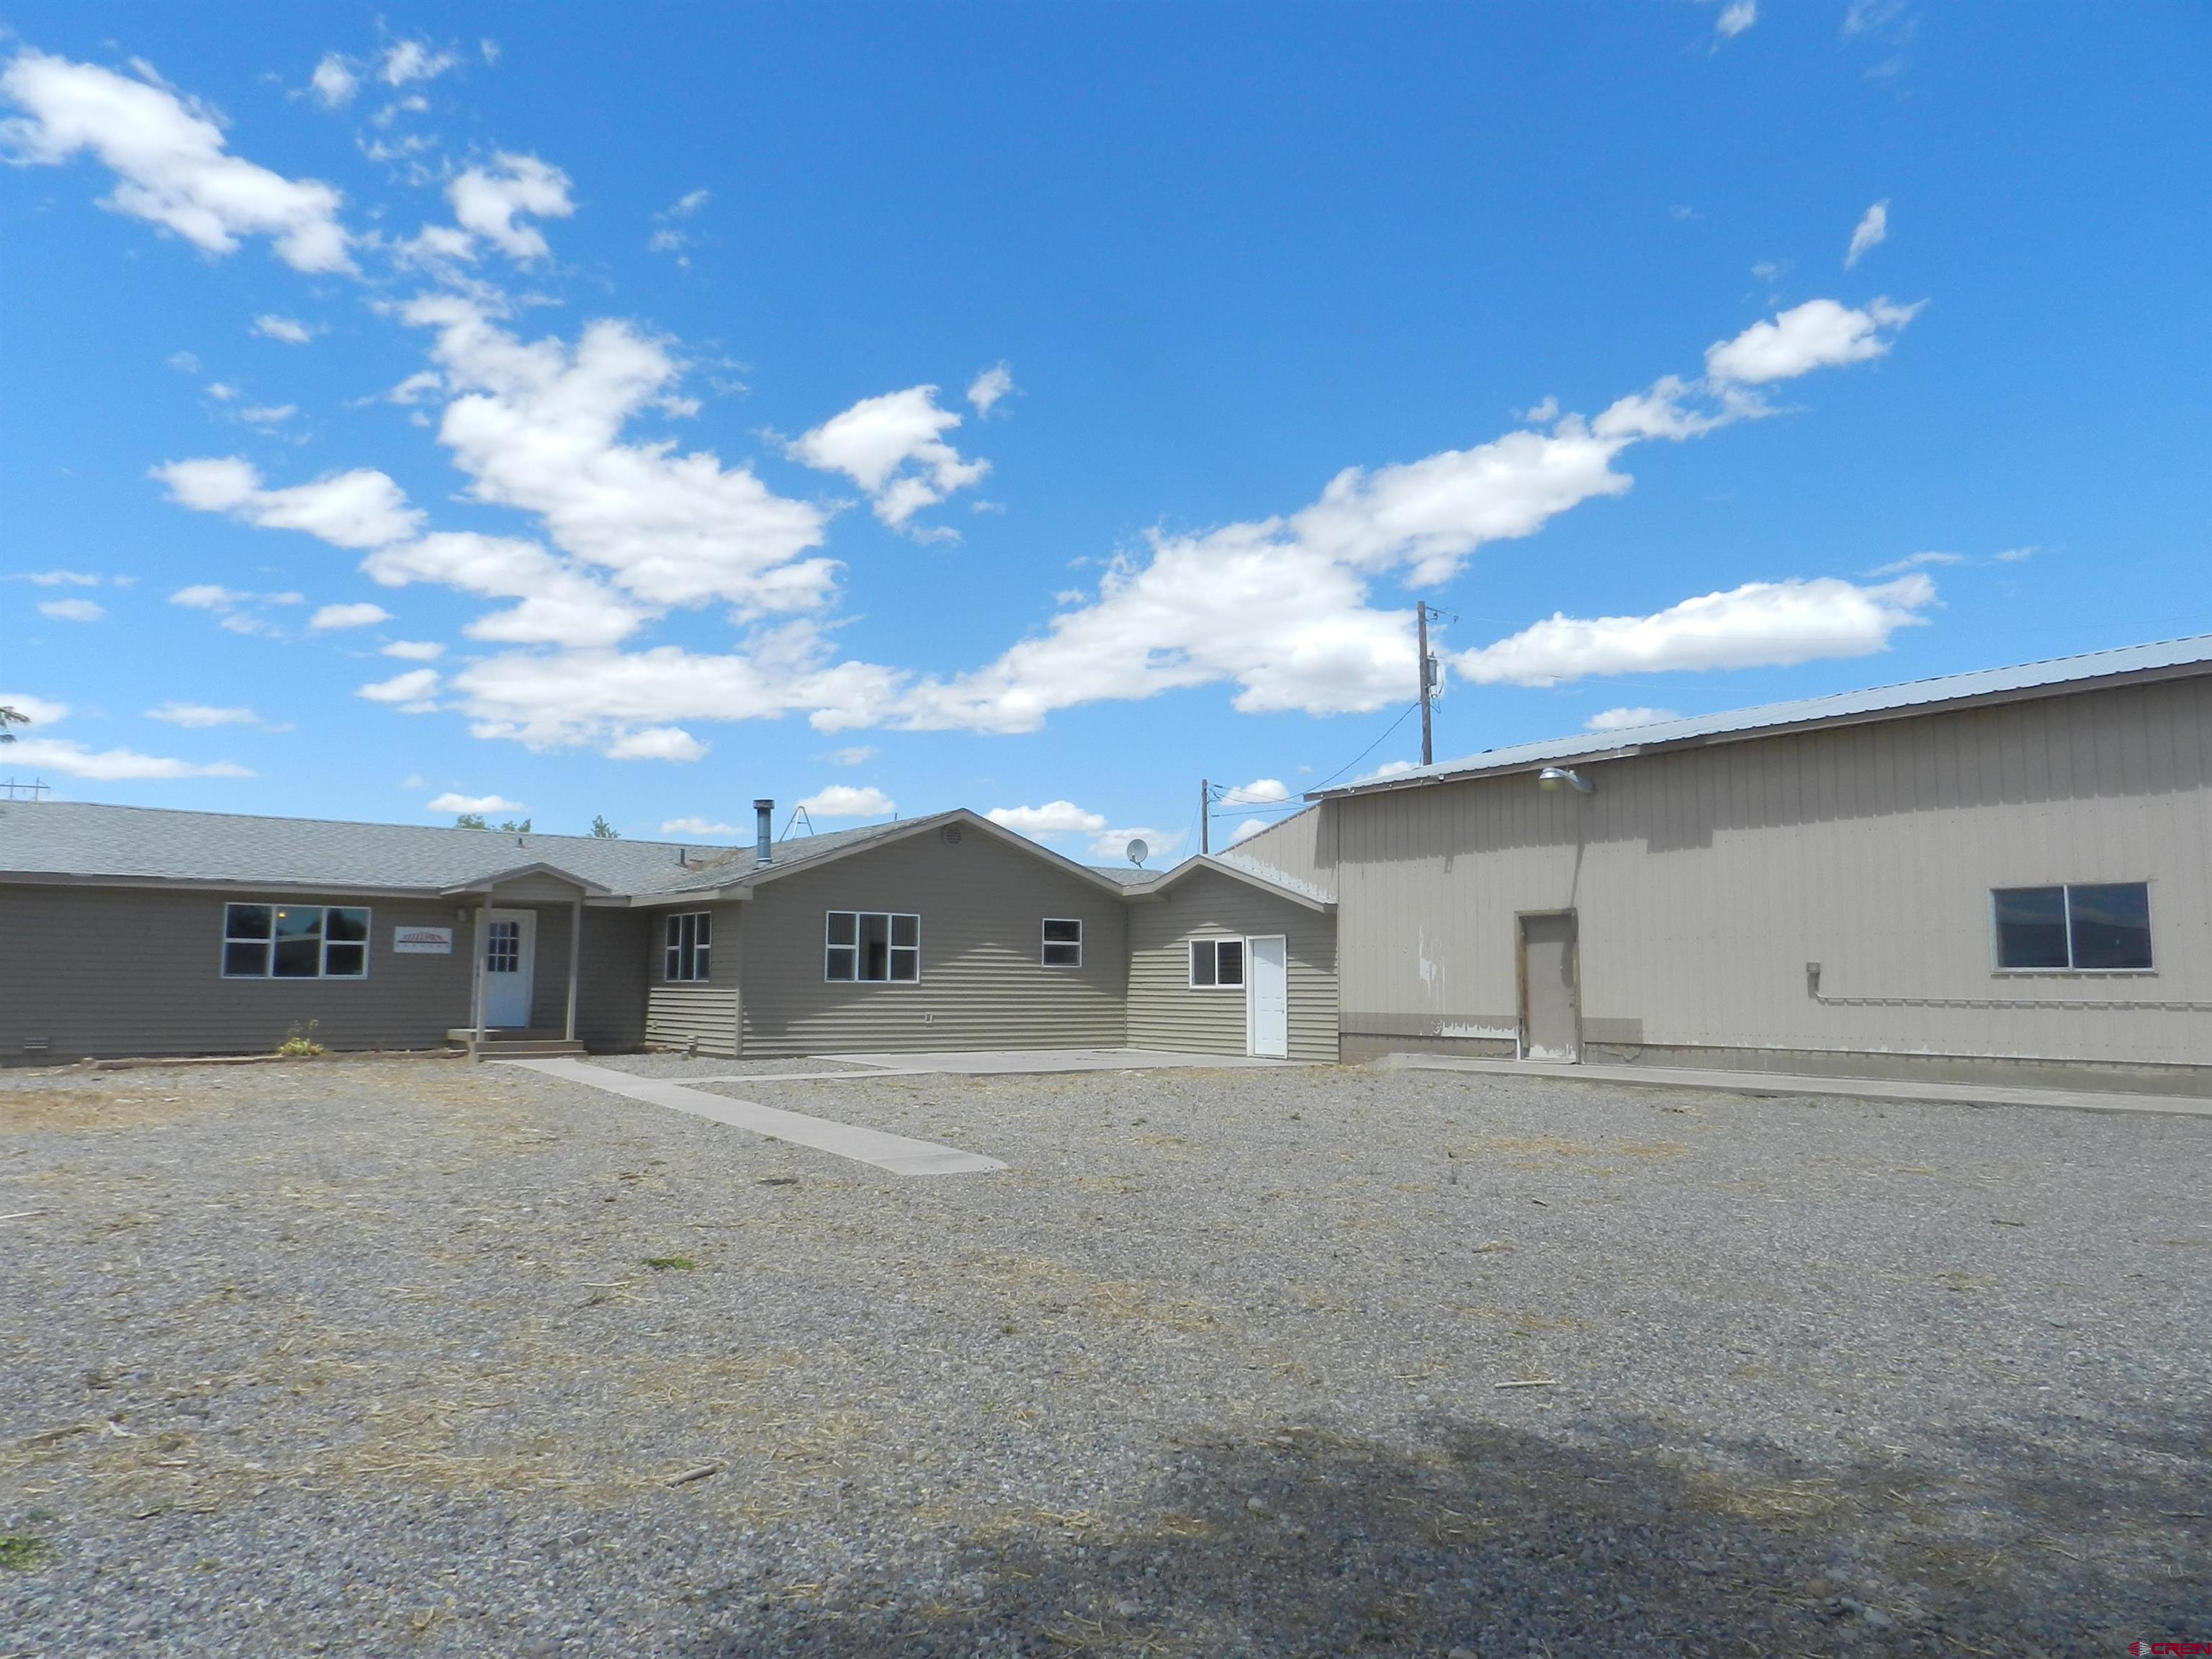 7.02 acres (MOL) commercial property located just off Highway 50/North Townsend Ave. Building is 5,307 sq.ft (MOL) and includes newly painted office space, storage and a 1,500 sq.ft. (MOL) warehouse/shop as well as a large graveled yard space. Zoned B-3 within the City of Montrose provides a variety of possibilities; construction/contractor services, limited manufacturing, building material sales and storage. Shop has one 10’ x 10’ and one 12’ x 12’ automatic overhead door. Easy access from Highway 50/ Highway 50 frontage road. Other facilities in close proximity include Montrose Regional Airport, UPS, Montrose Daily Press, FedEx and Delta-Montrose Electric Association (DMEA).